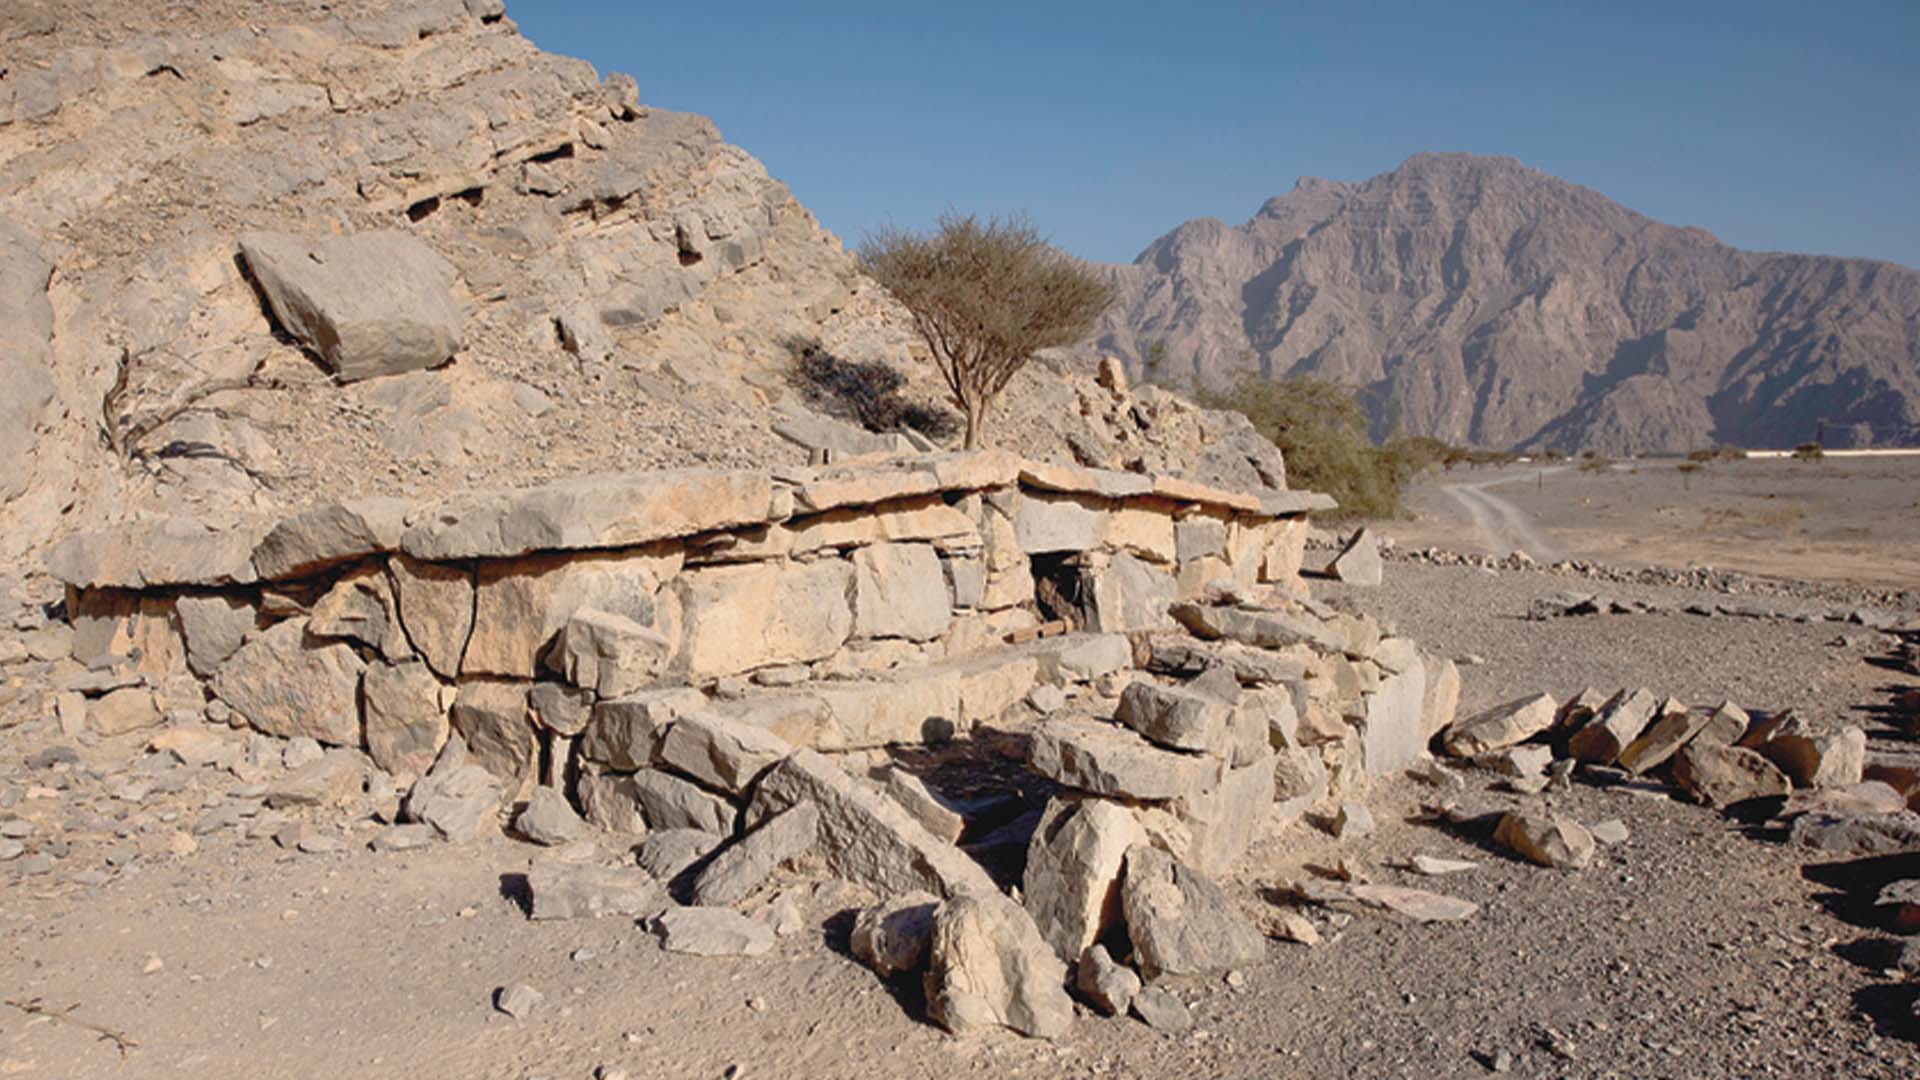 A panoramic photograph immortalizes Bait Al-Qufl, a distinctive traditional storage structure found in the Musandam Peninsula, harmoniously nestled amidst the backdrop of majestic mountains.